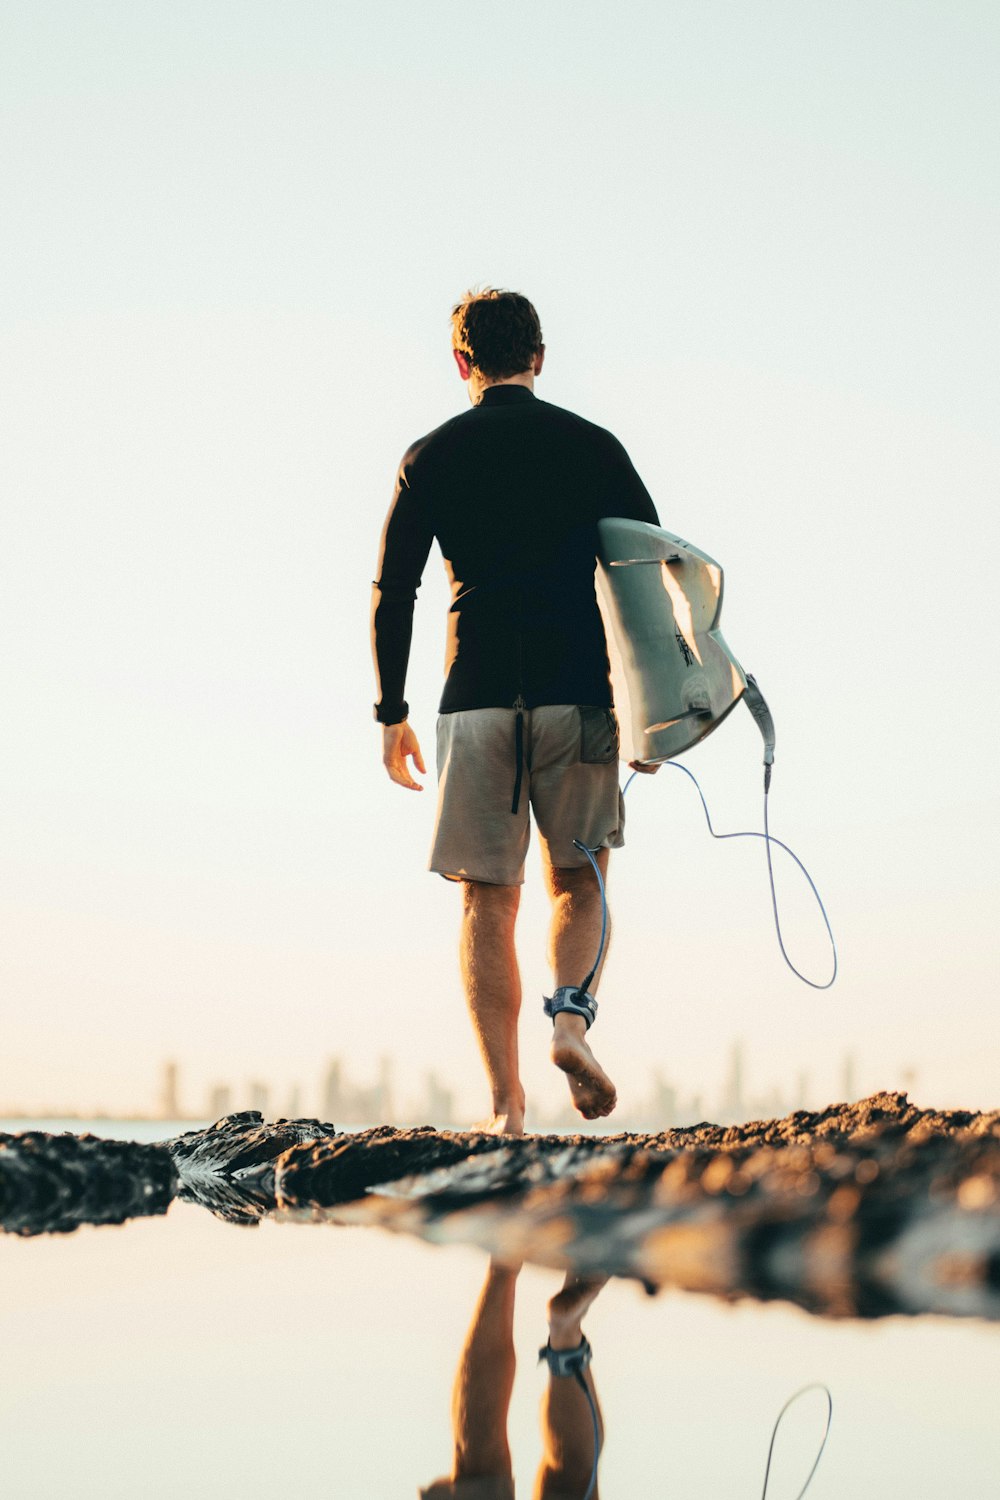 man in black long sleeve shirt and gray shorts carrying white and black surfboard during daytime